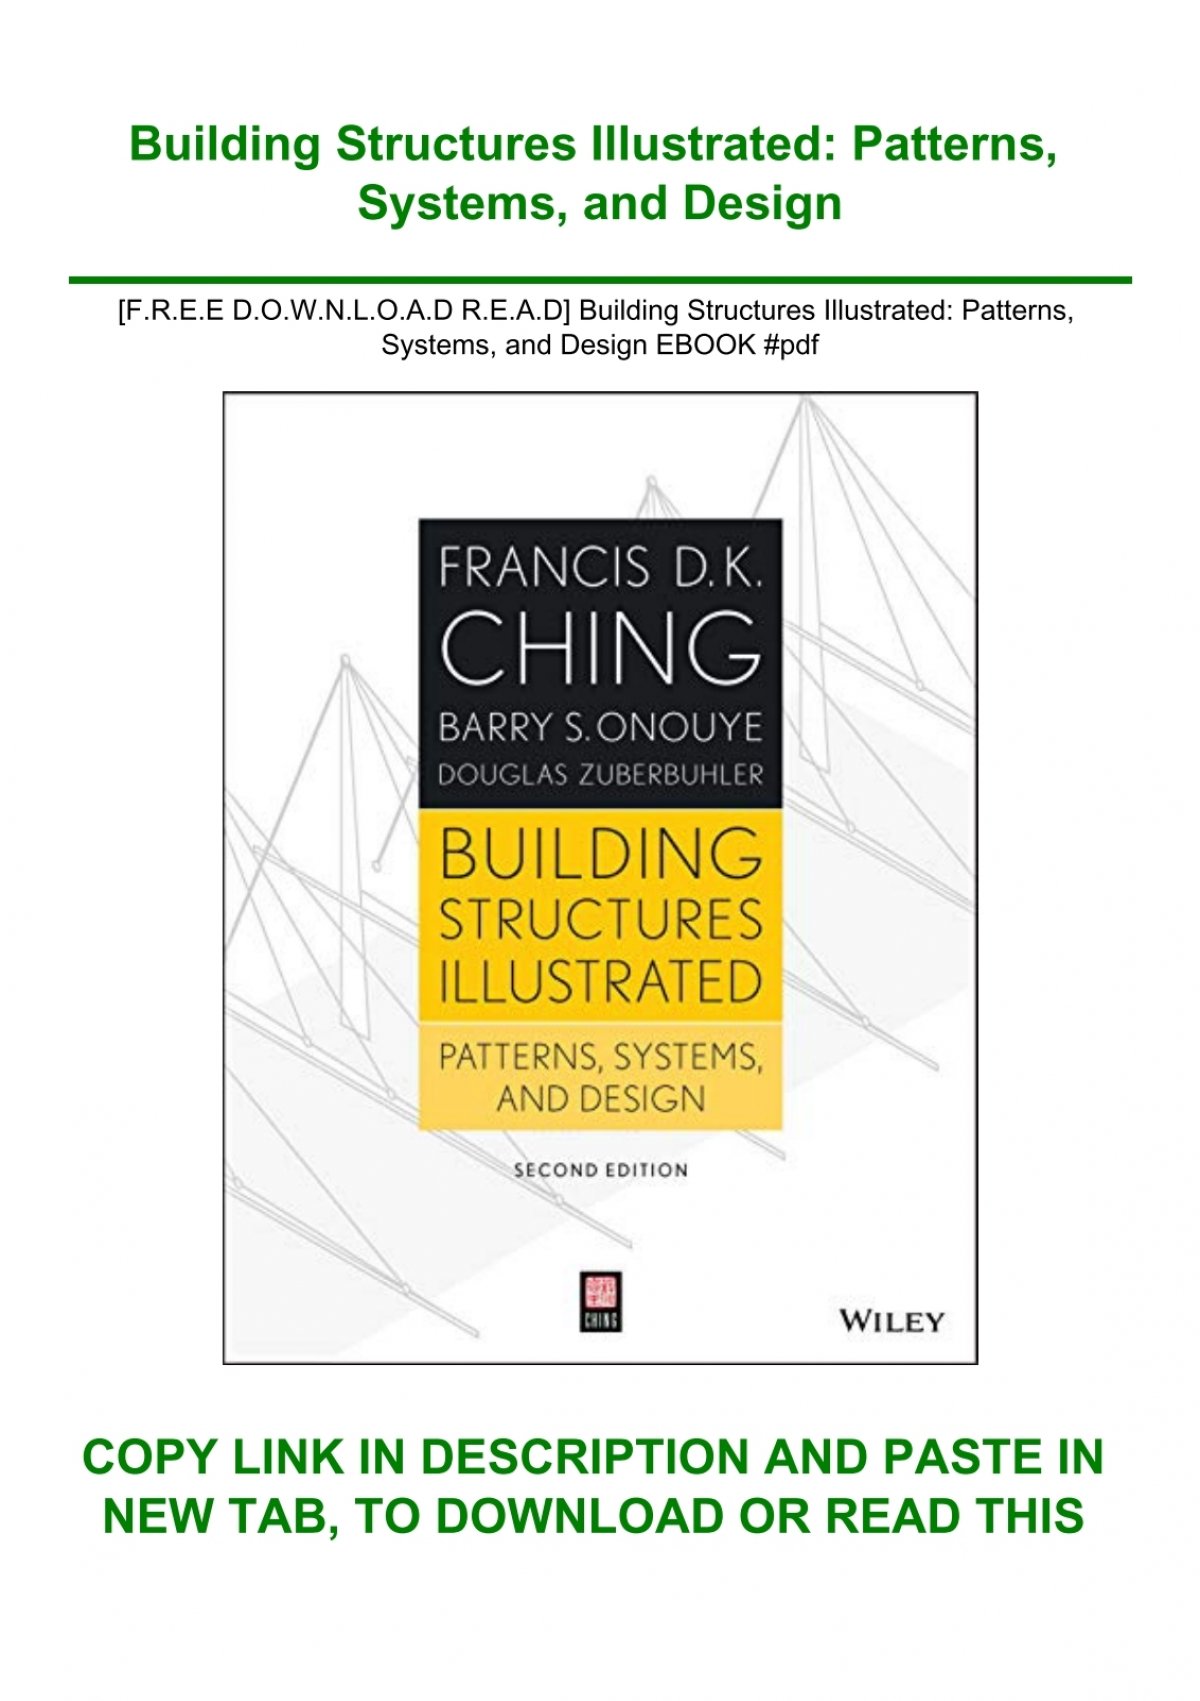 building structures illustrated patterns systems and design pdf free download